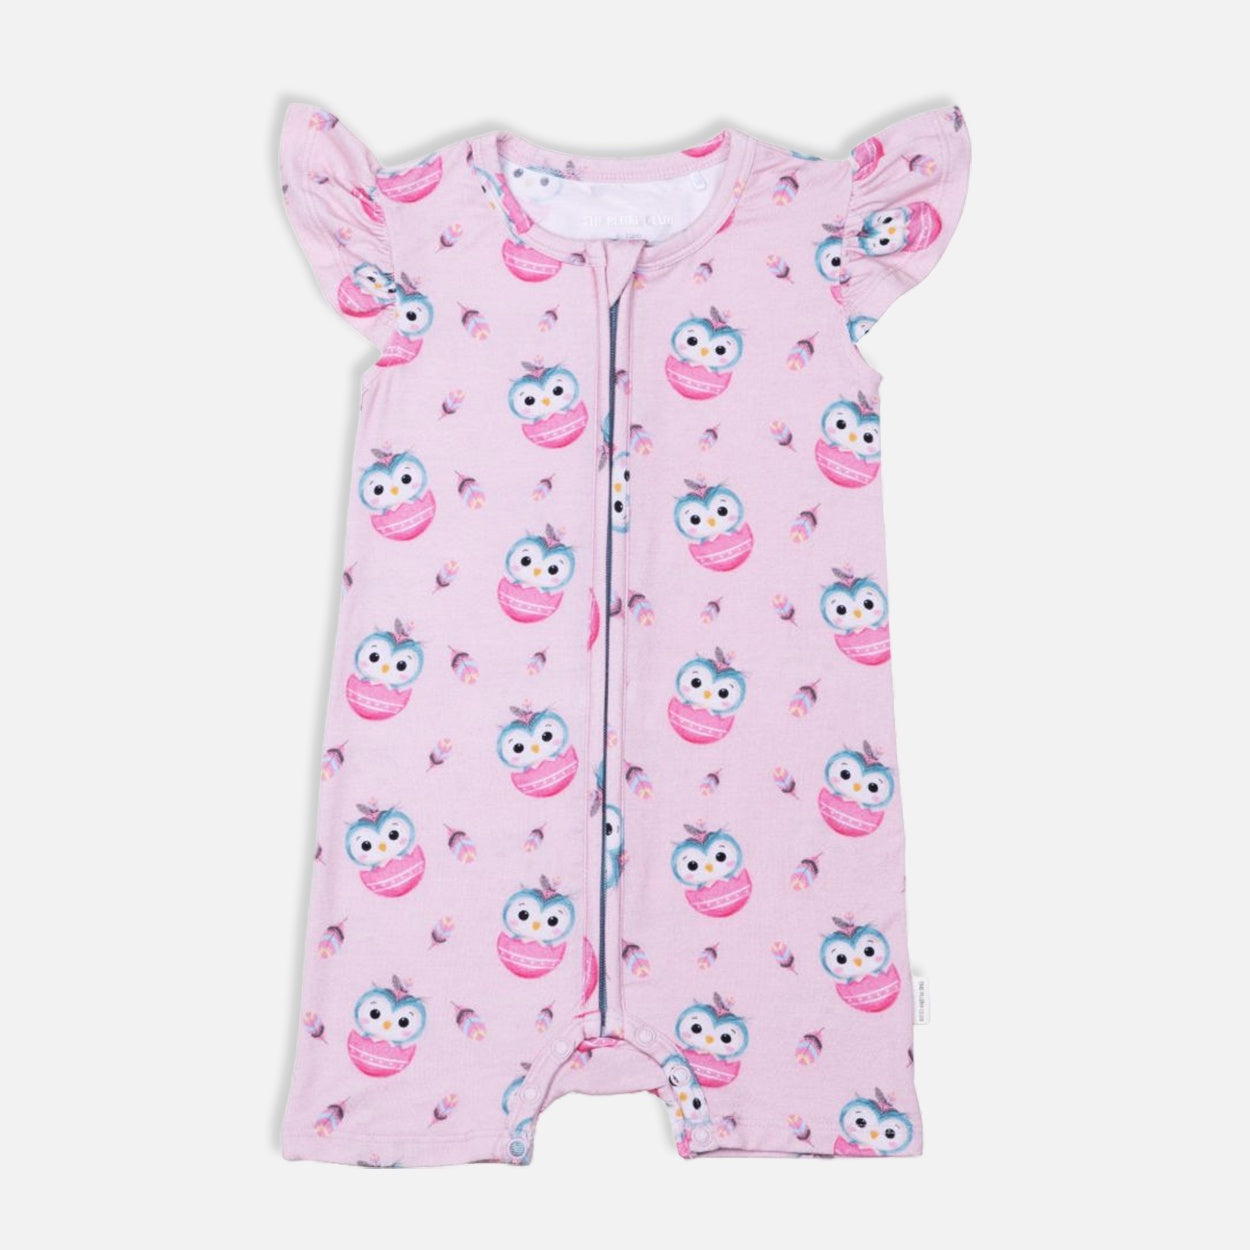 Owlster Half Sleeves Zippie | kids Fashion | The Green Collective SG